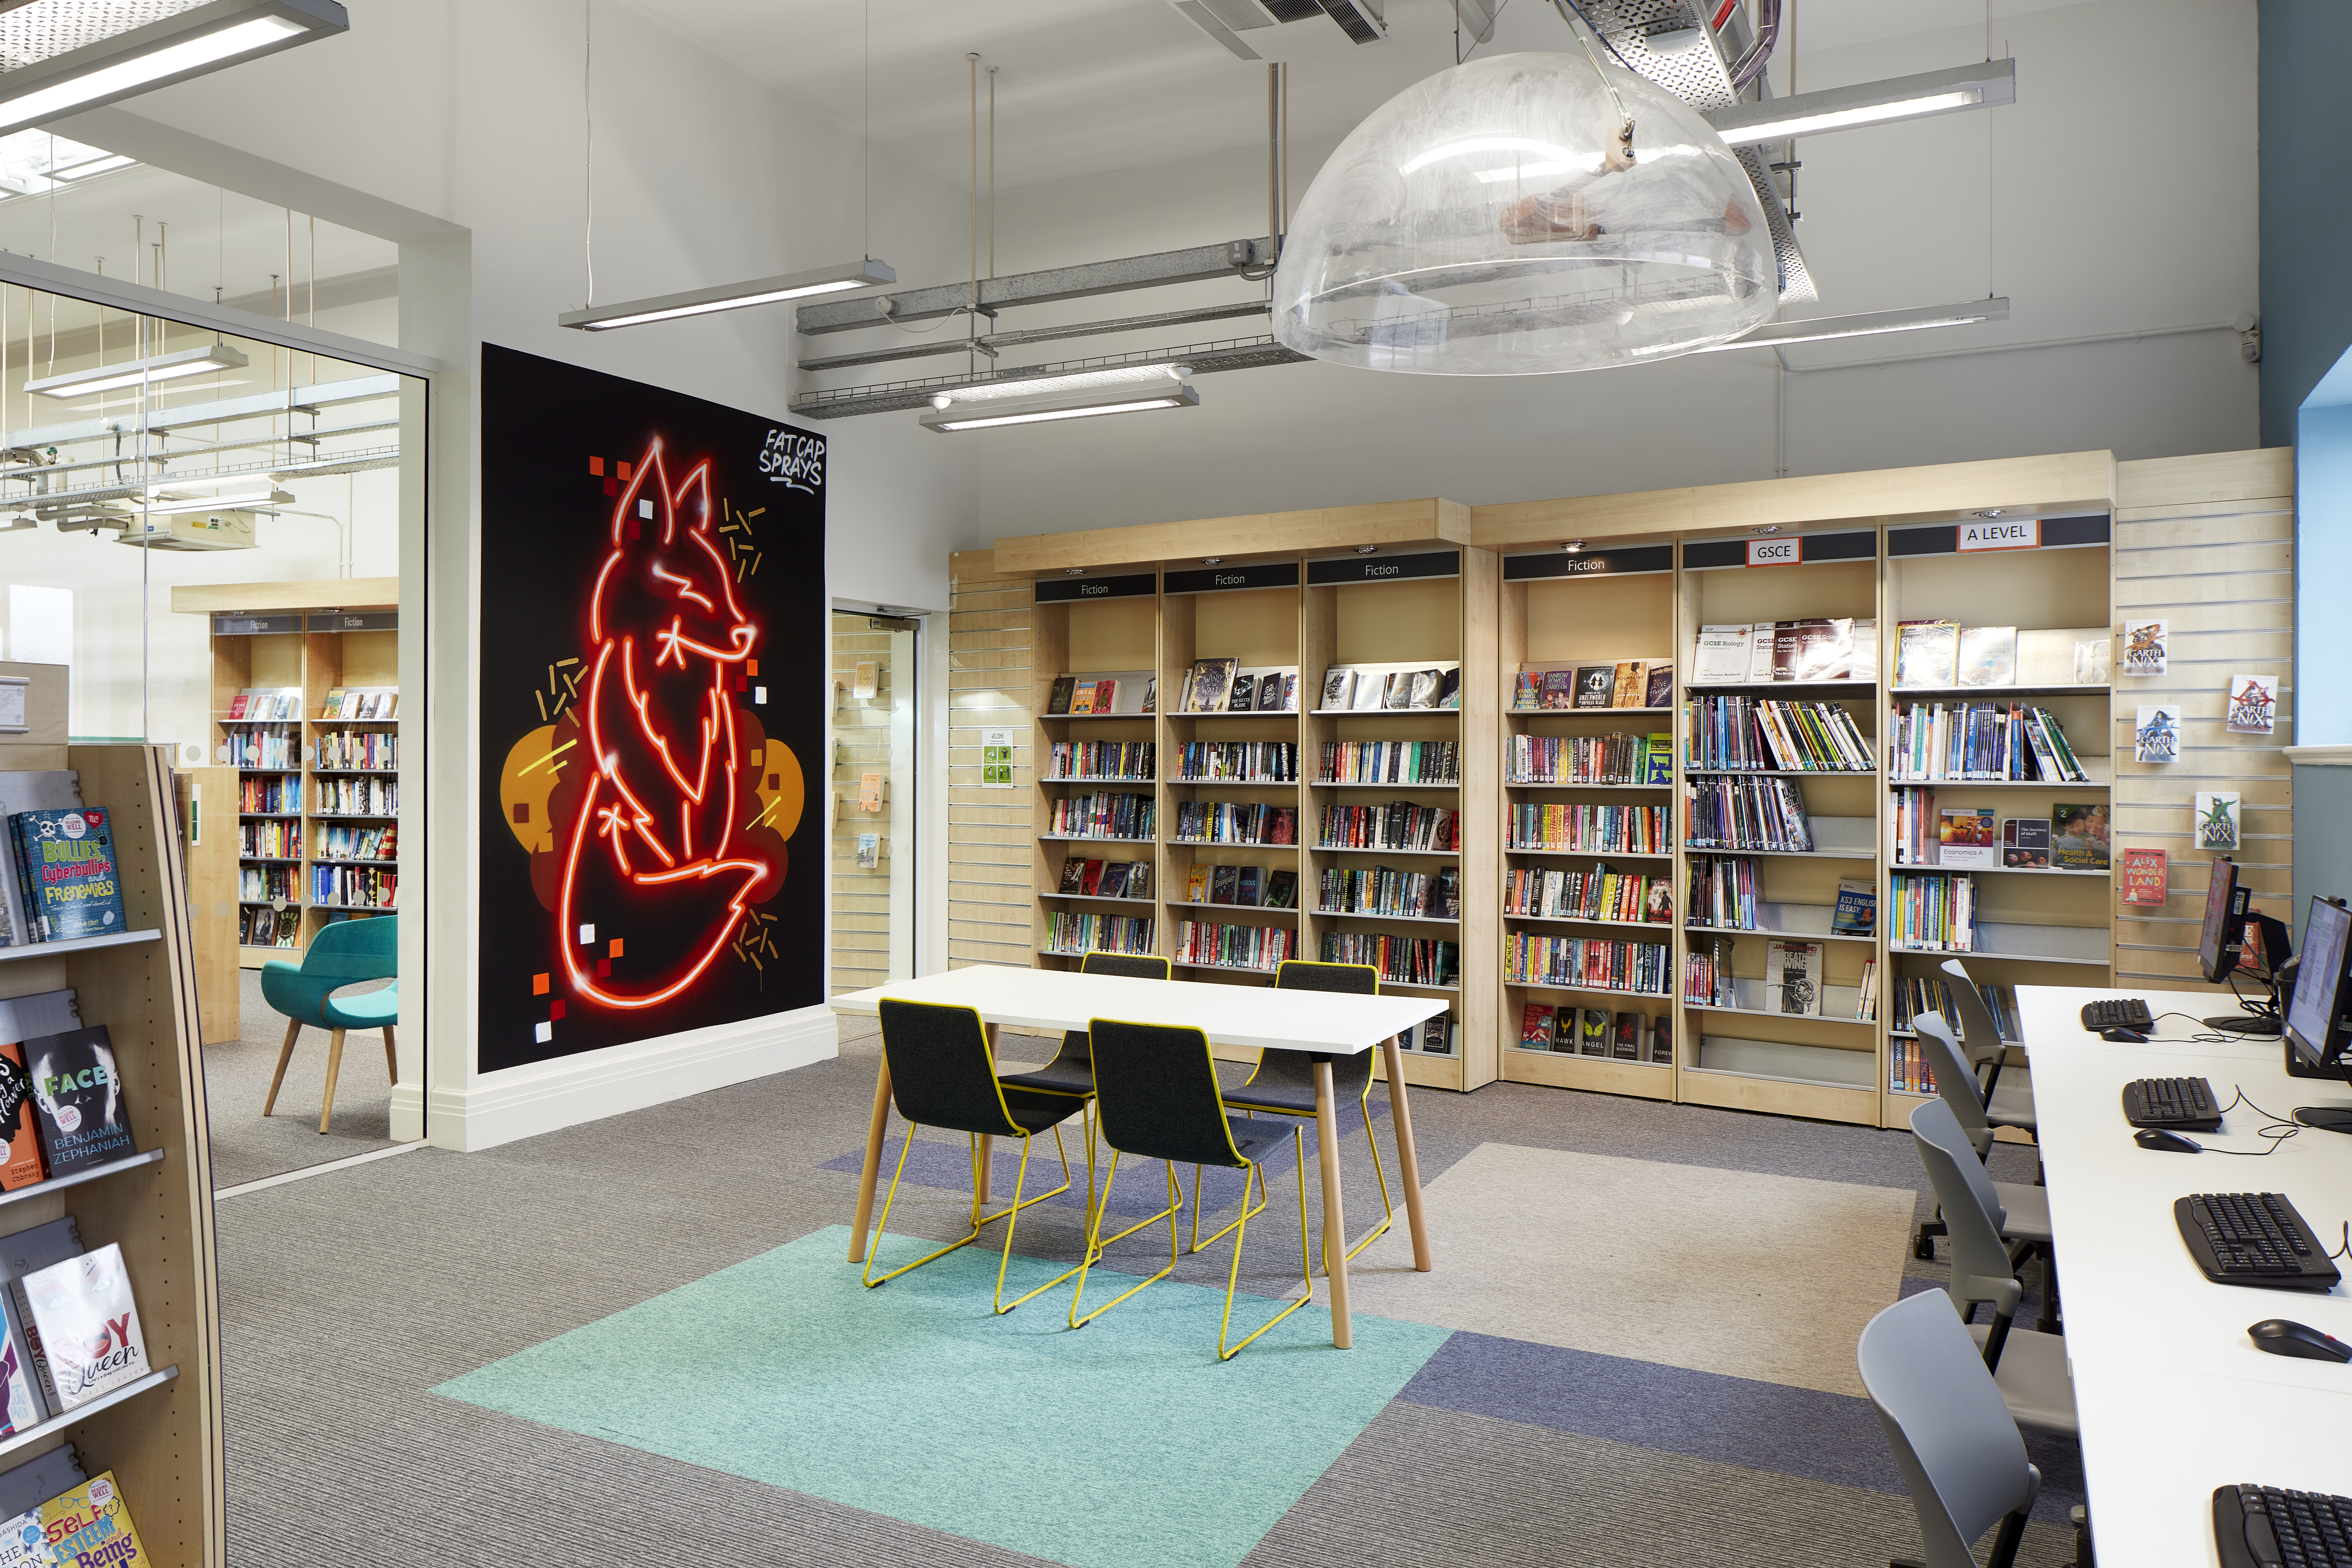 Internal shot of Eltham library, showing bookshelves, a table with chairs and art work on the wall